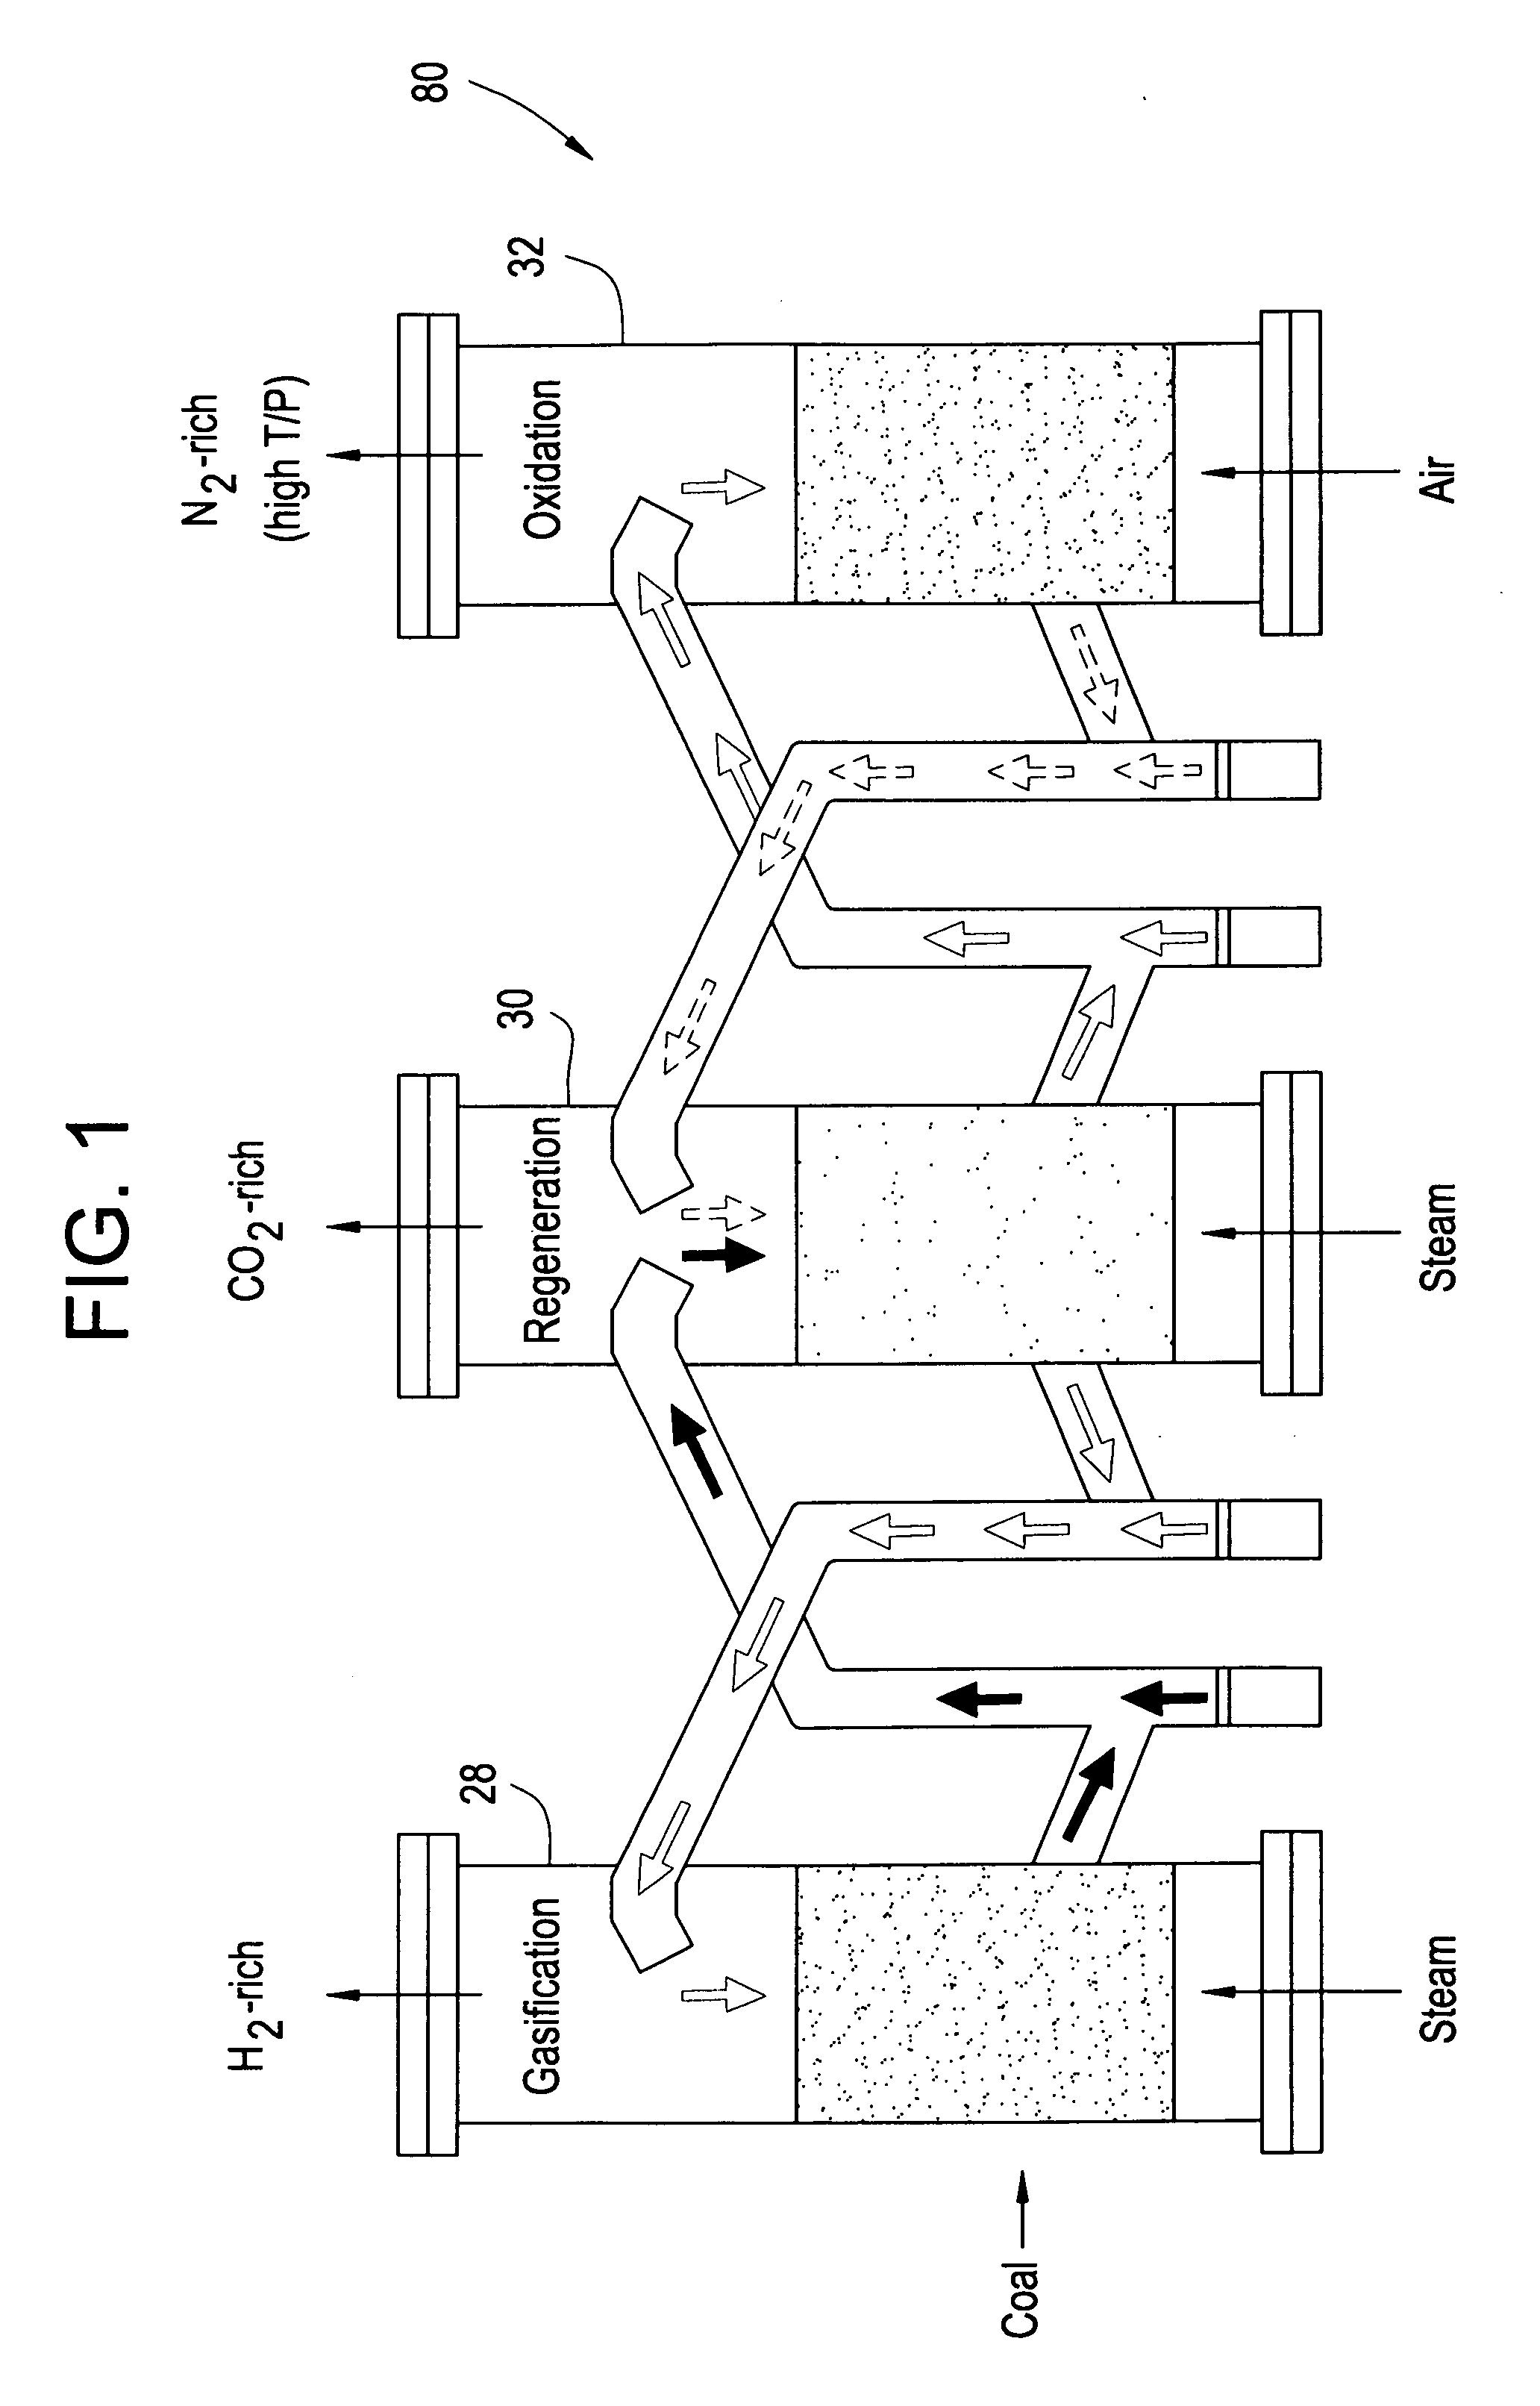 Systems and Methods Using an Unmixed Fuel Processor